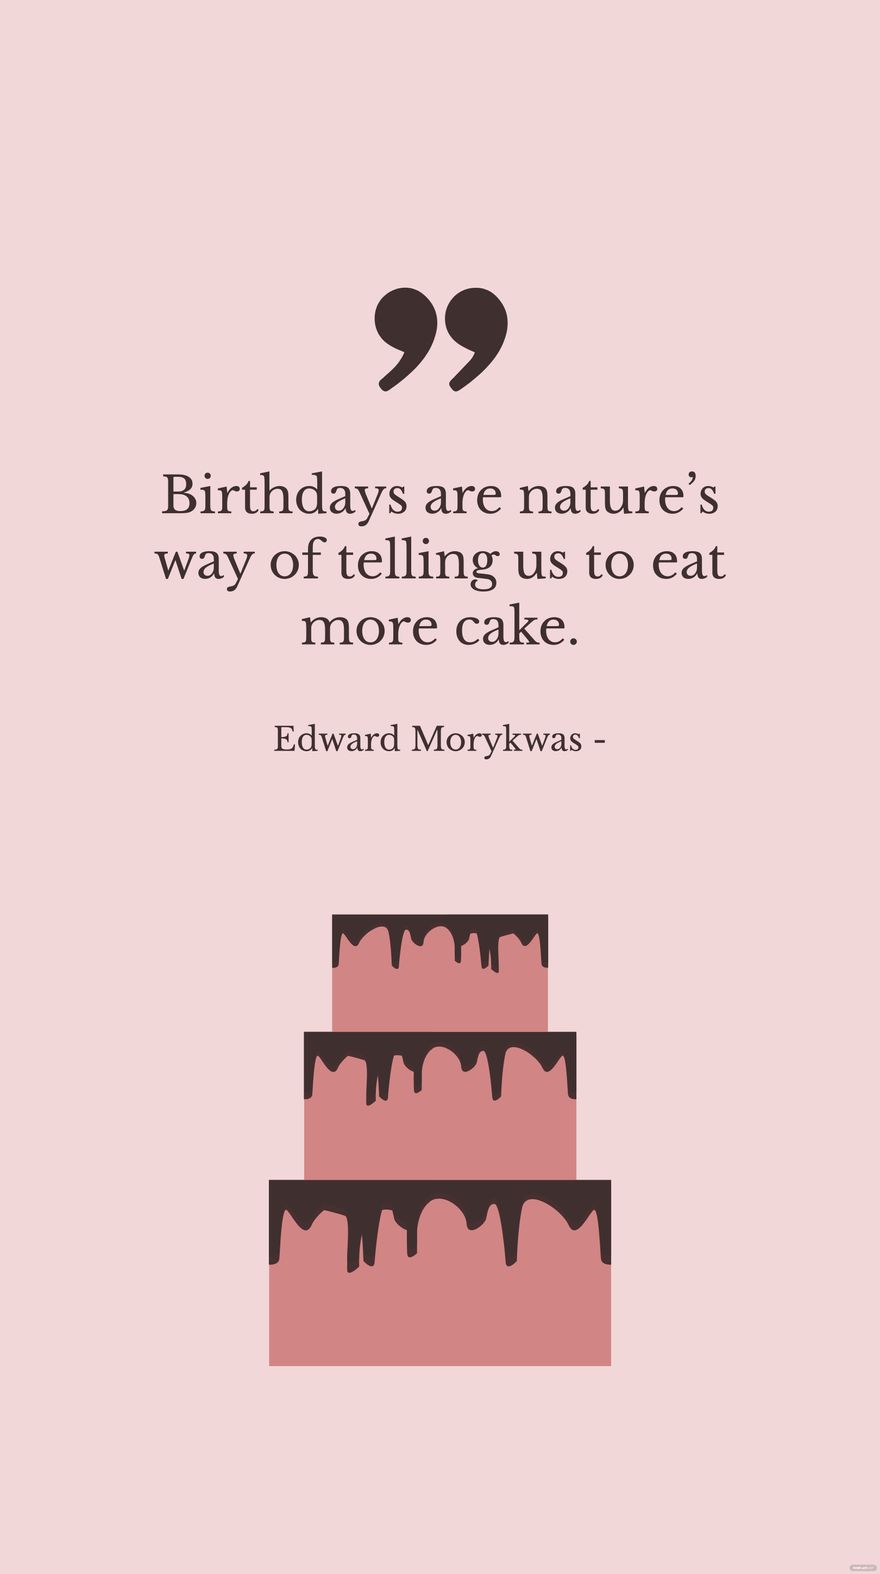 Free Edward Morykwas - Birthdays are nature’s way of telling us to eat more cake. in JPG